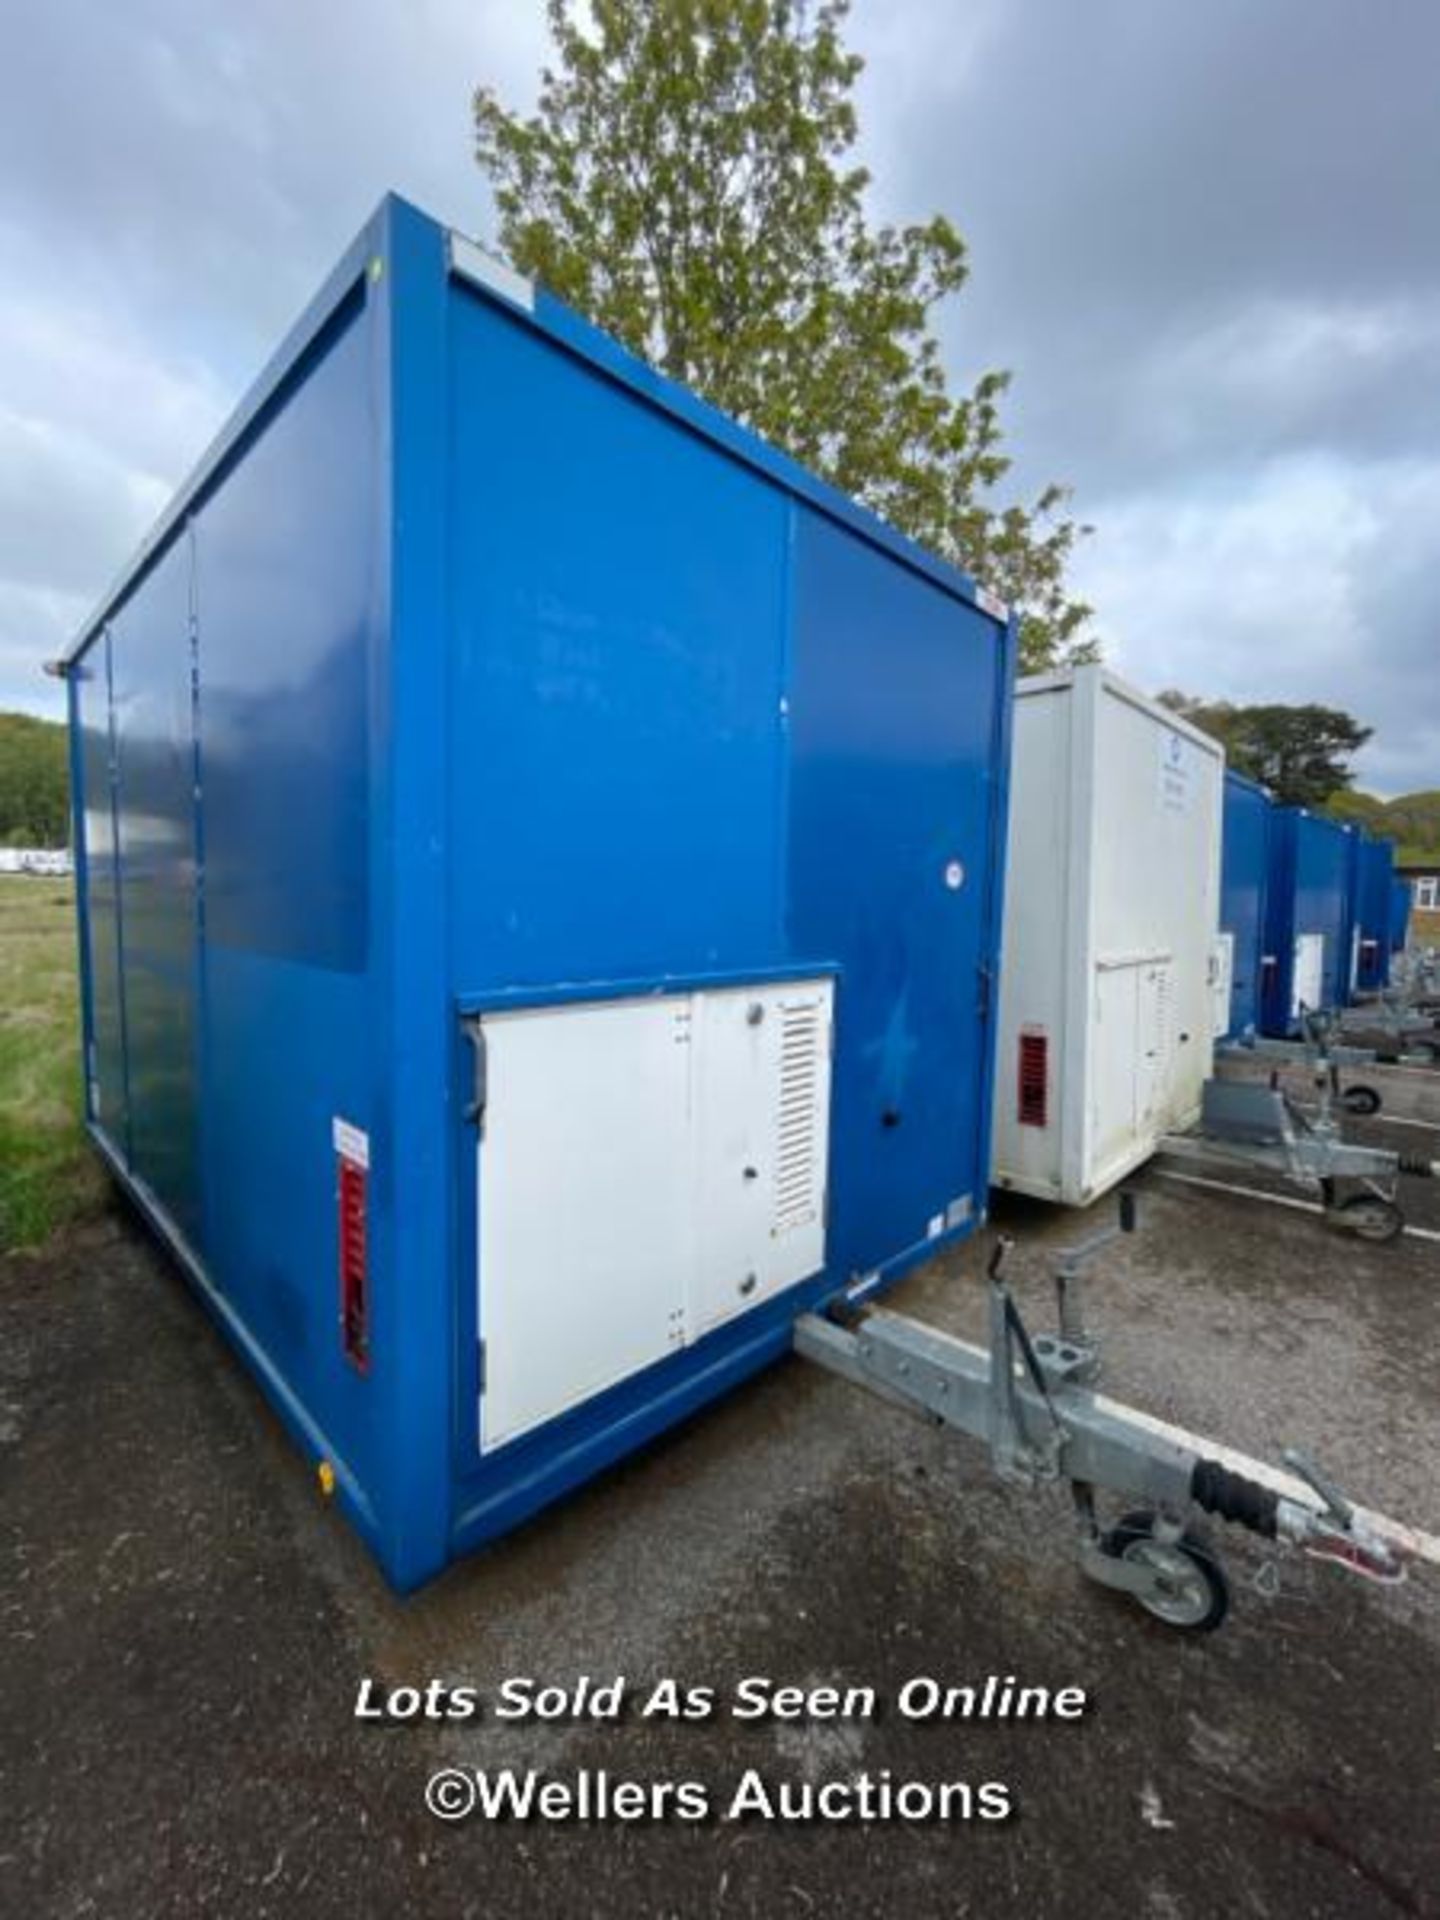 6 PERSON 12 X 7.5FT AJC EASY CABIN TOWABLE WELFARE UNIT, INCLUDES WASH BASIN, KETTLE, MICROWAVE, - Image 2 of 19